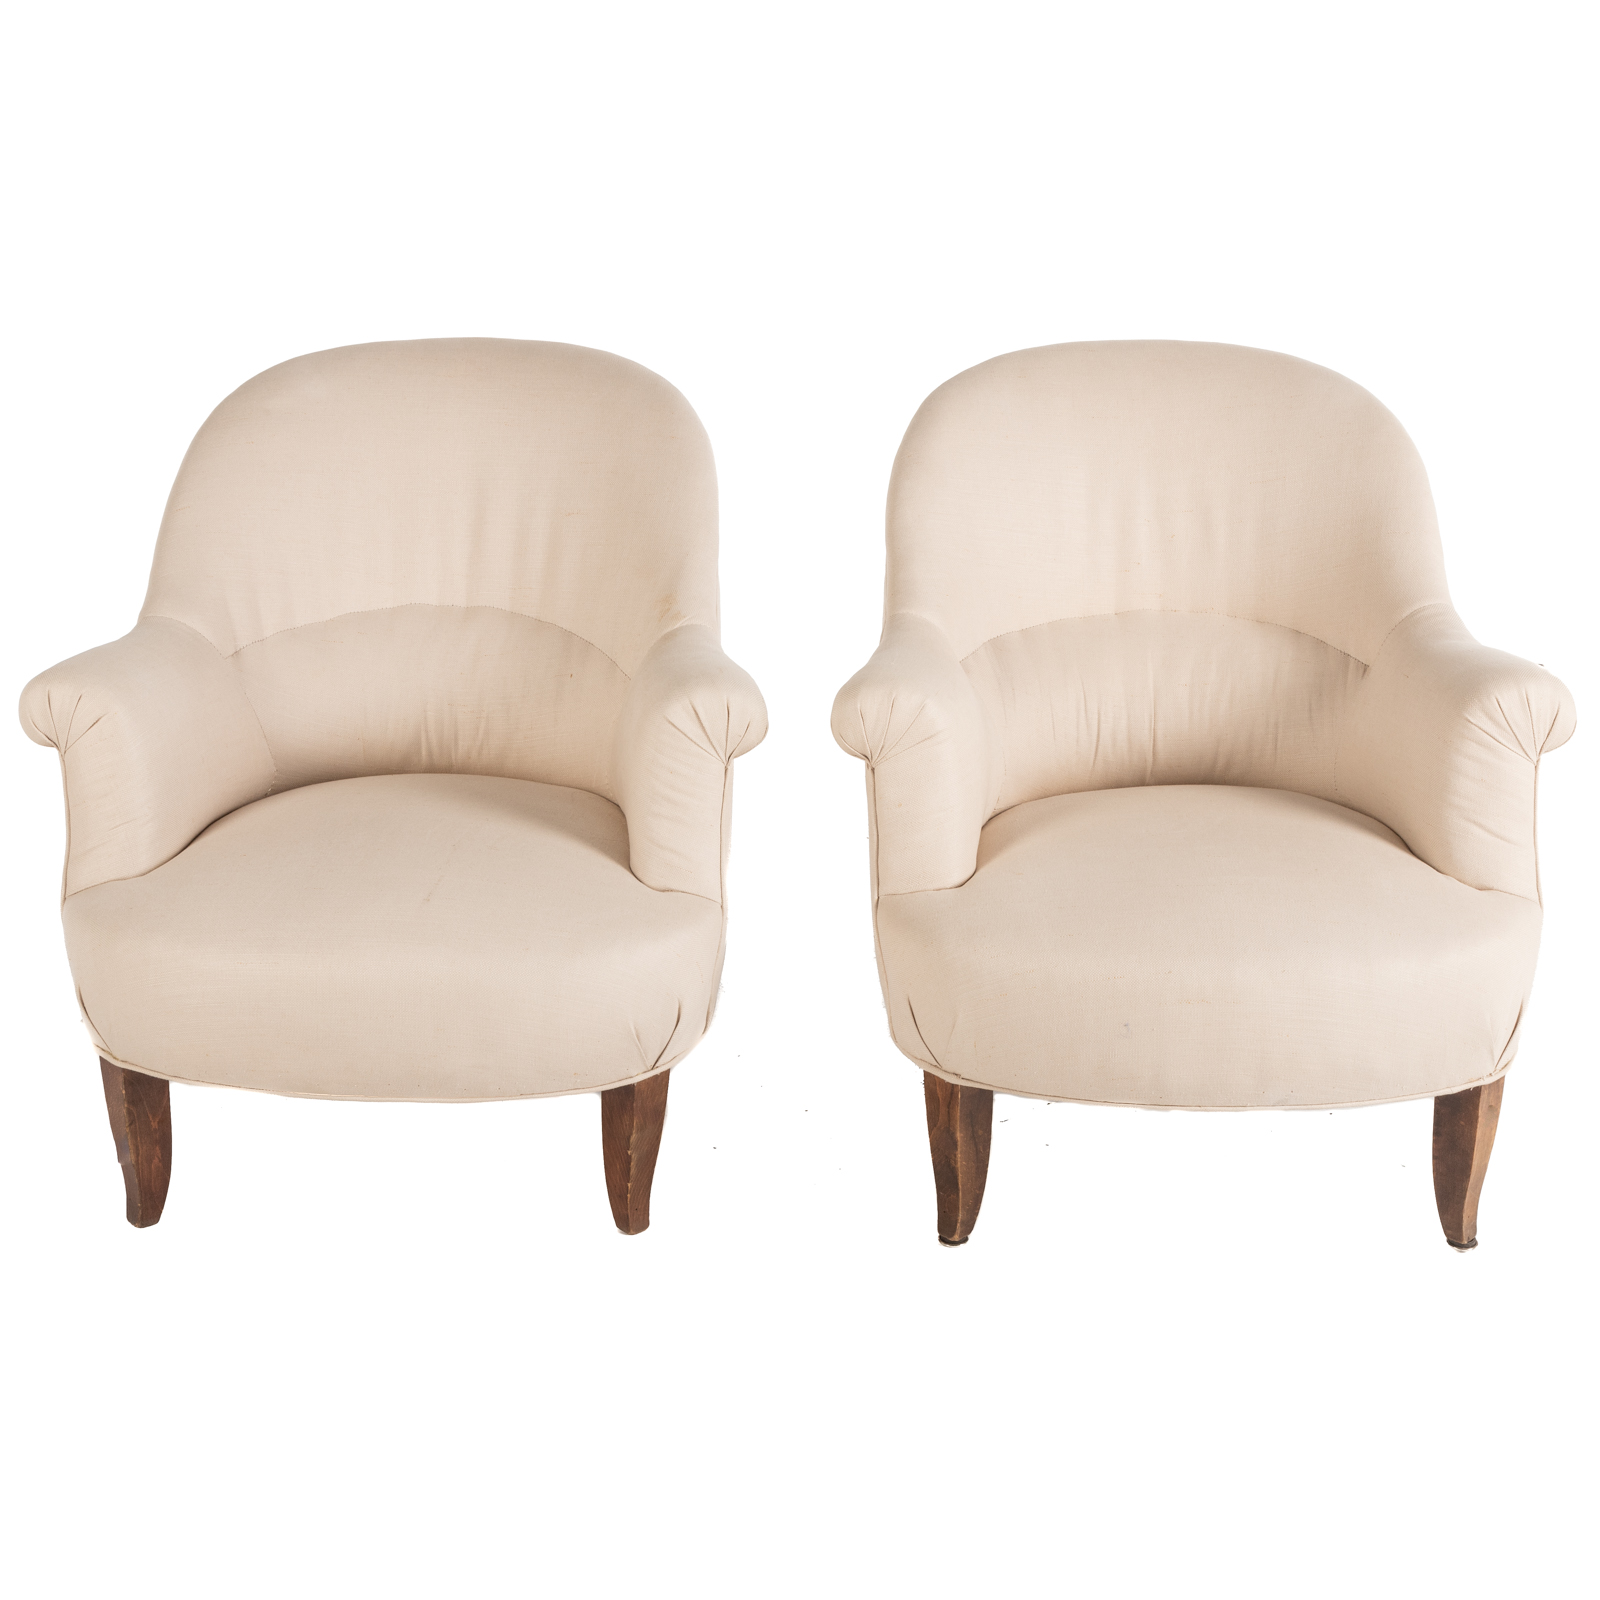 LE STYLE PAIR OF UPHOLSTERED CHAIRS